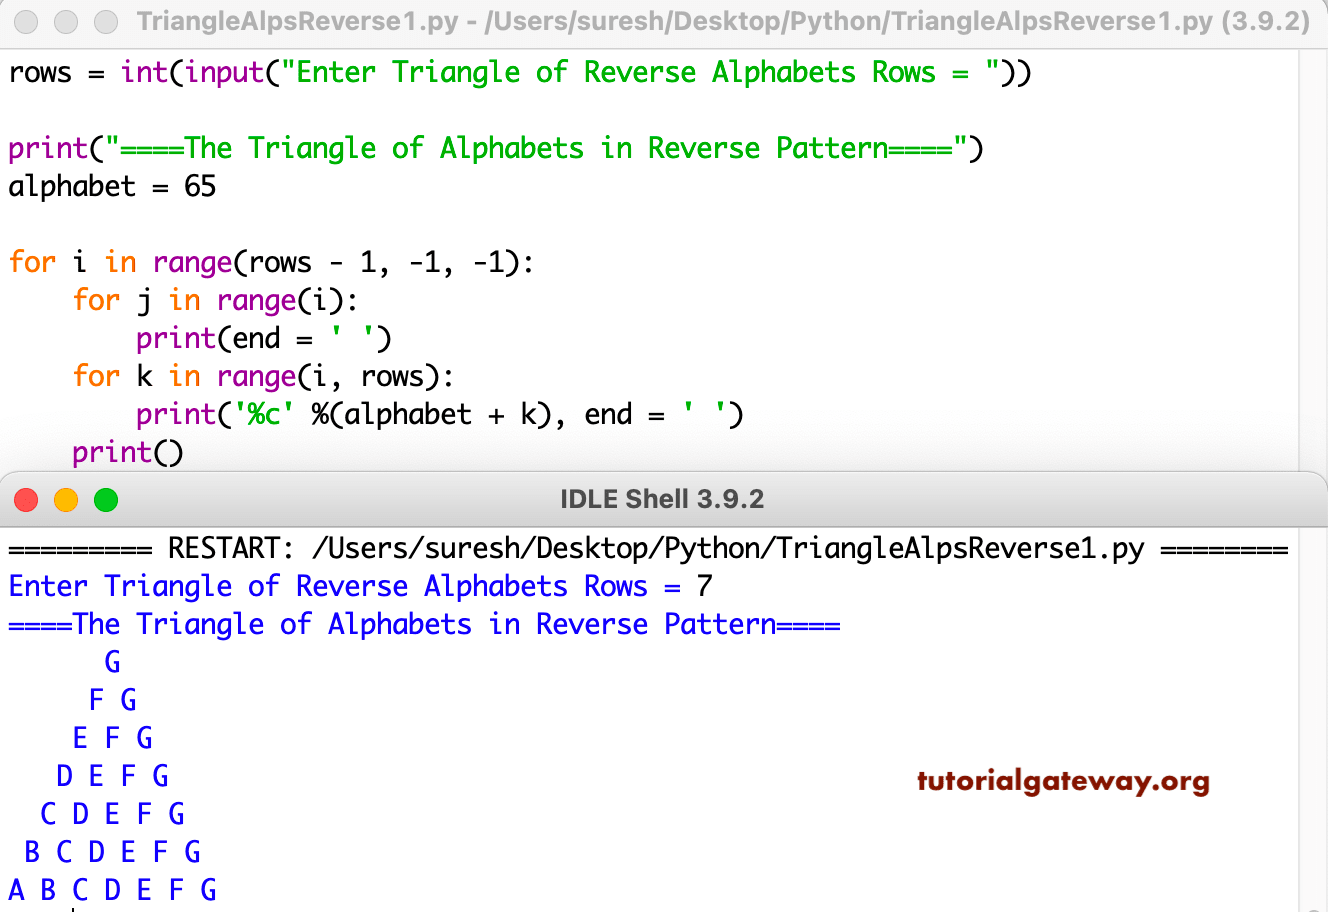 Python Program to Print Triangle of Alphabets in Reverse Pattern